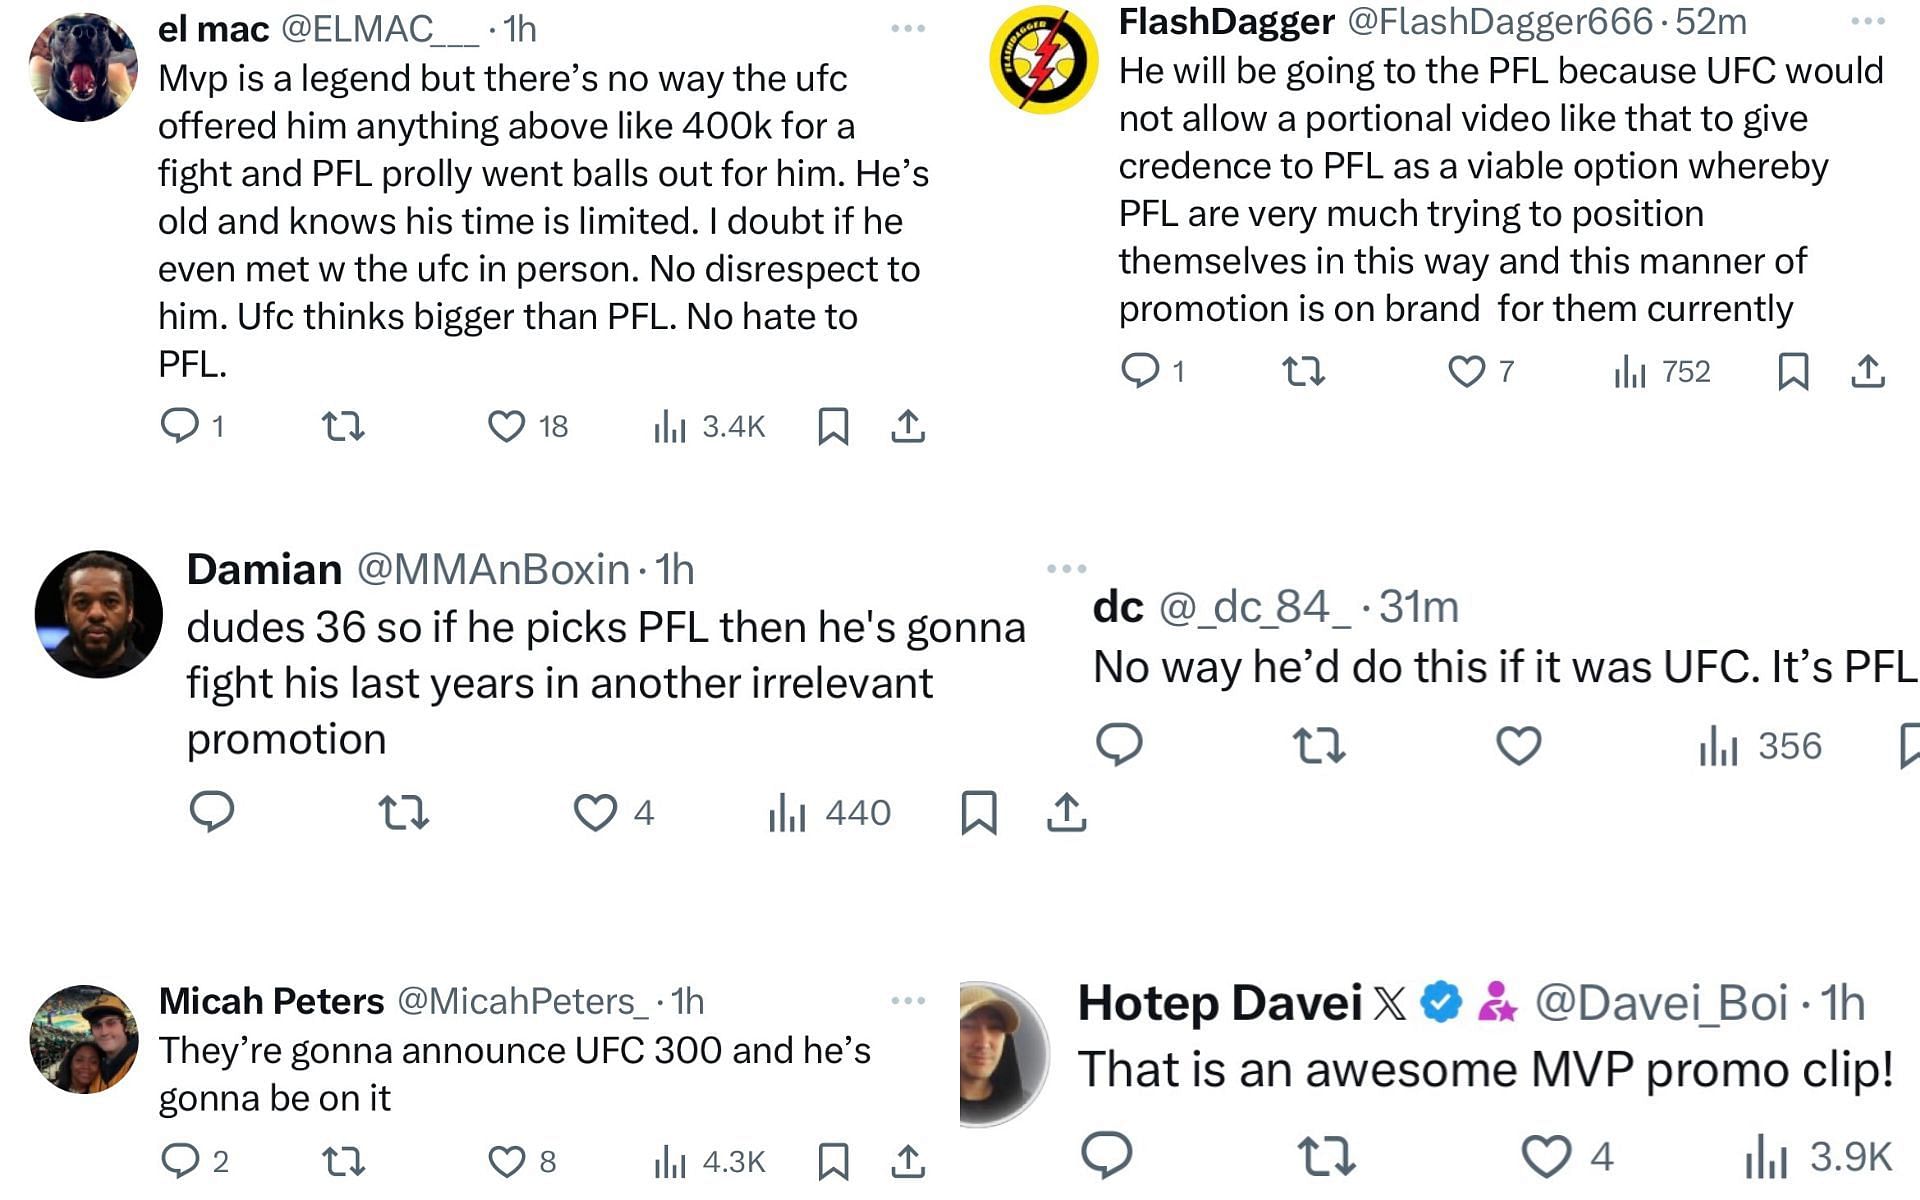 They're gonna announce UFC 300 and he's gonna be on it” - Michael 'Venom'  Page's promotion announcement teaser sets MMA Twitter ablaze